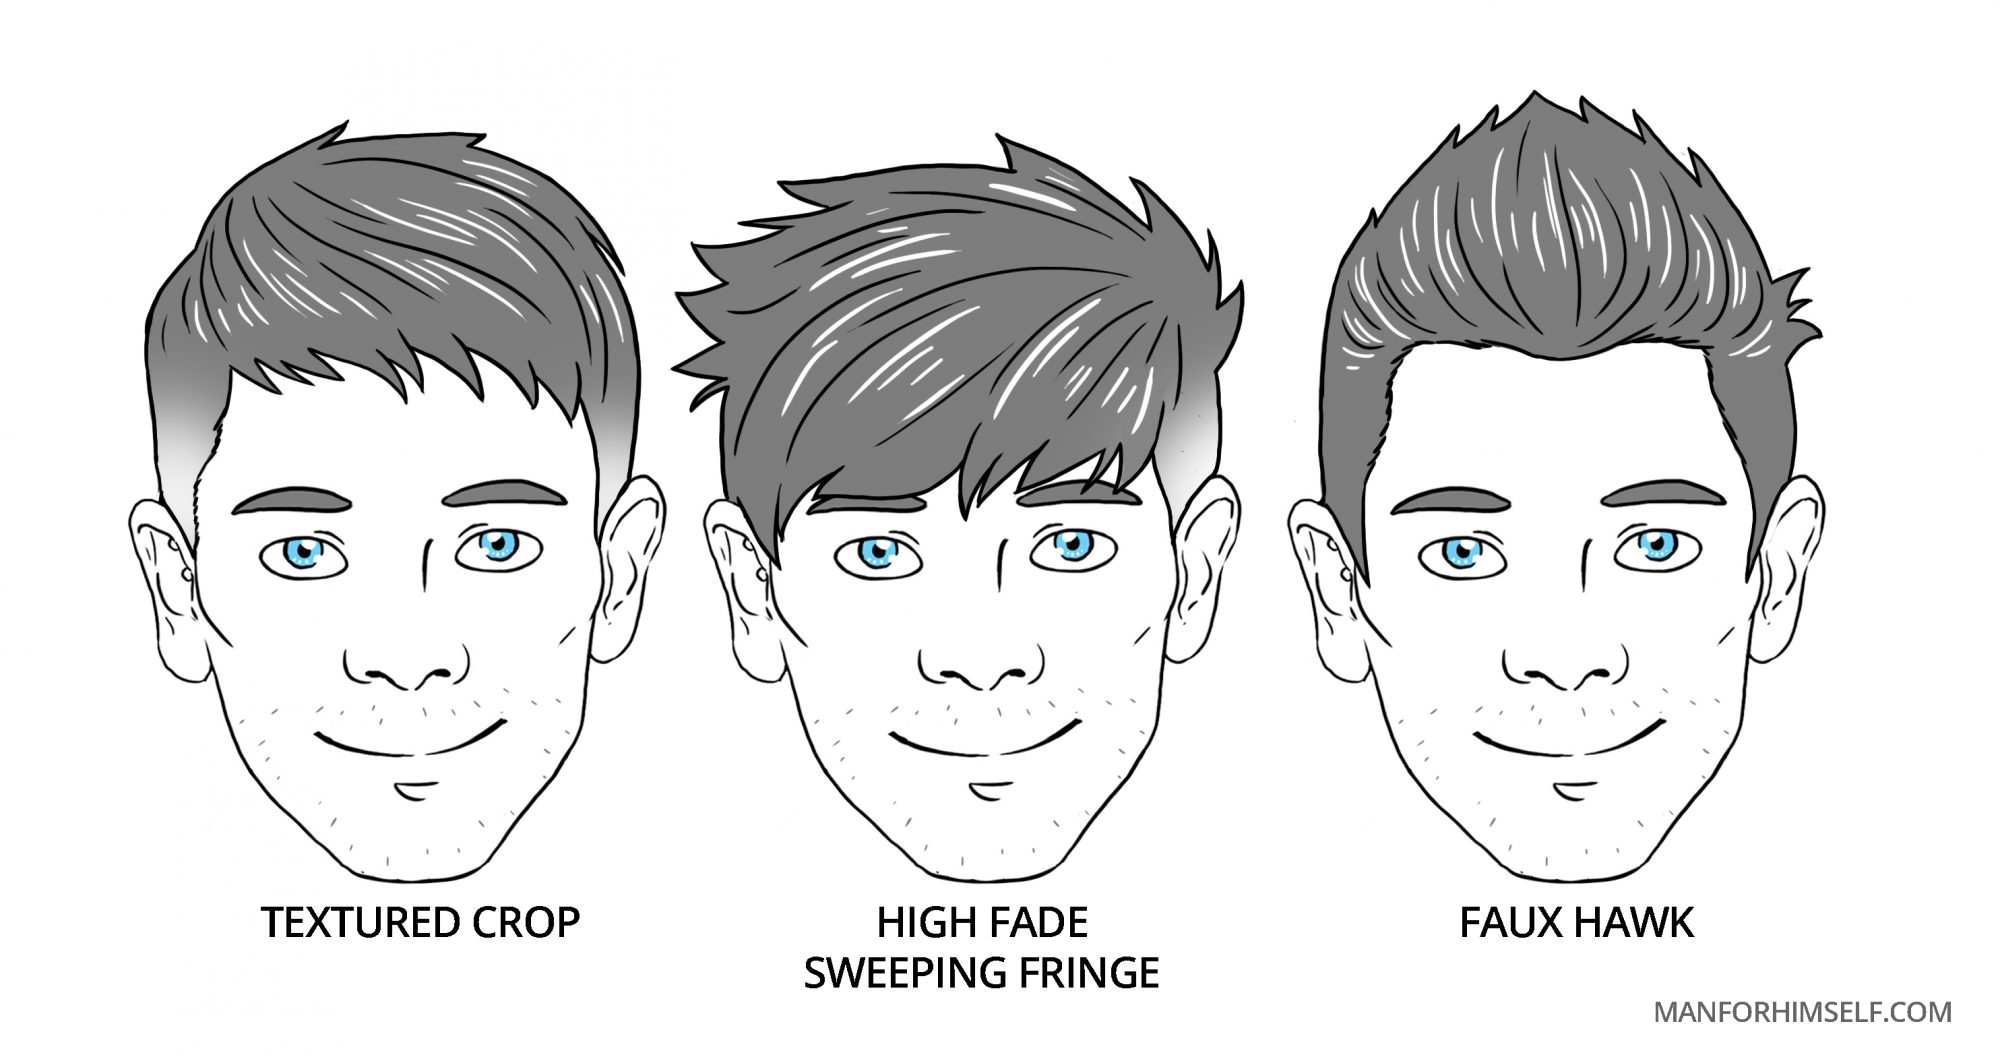 Hairstyle sugestions for diamond face shape? Thank you! : r/malehairadvice